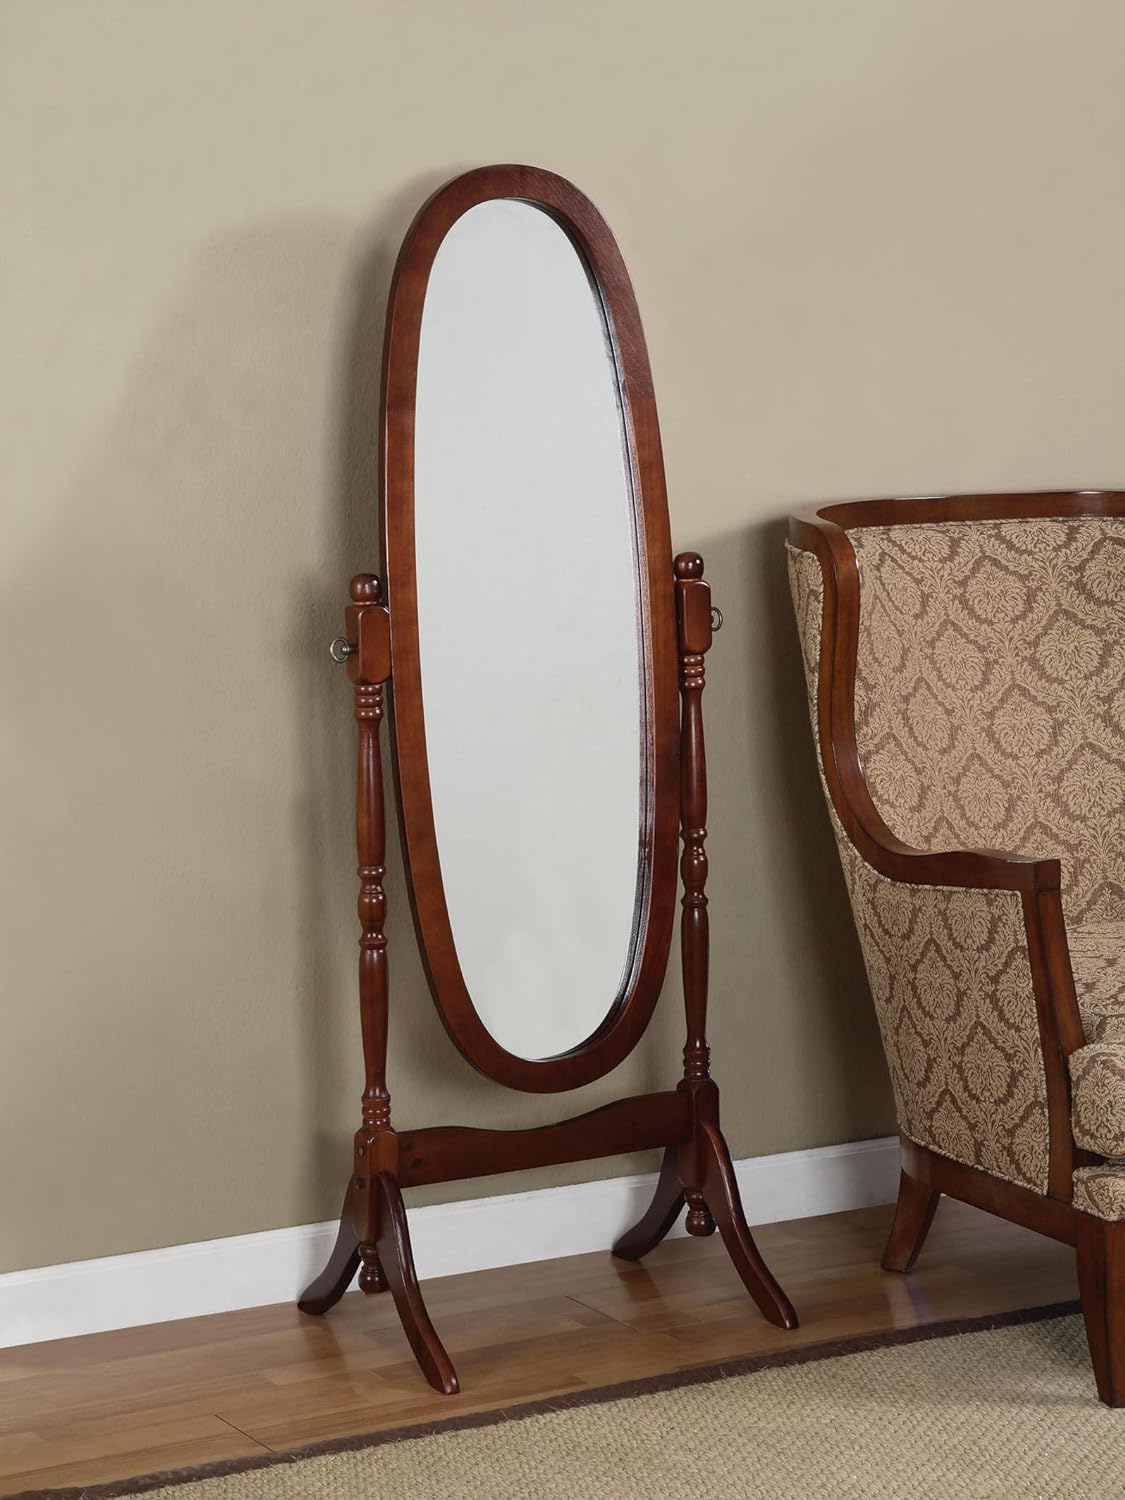 This mirror Is perfect. It was very easy to assemble and work fits perfectly in my guest room.